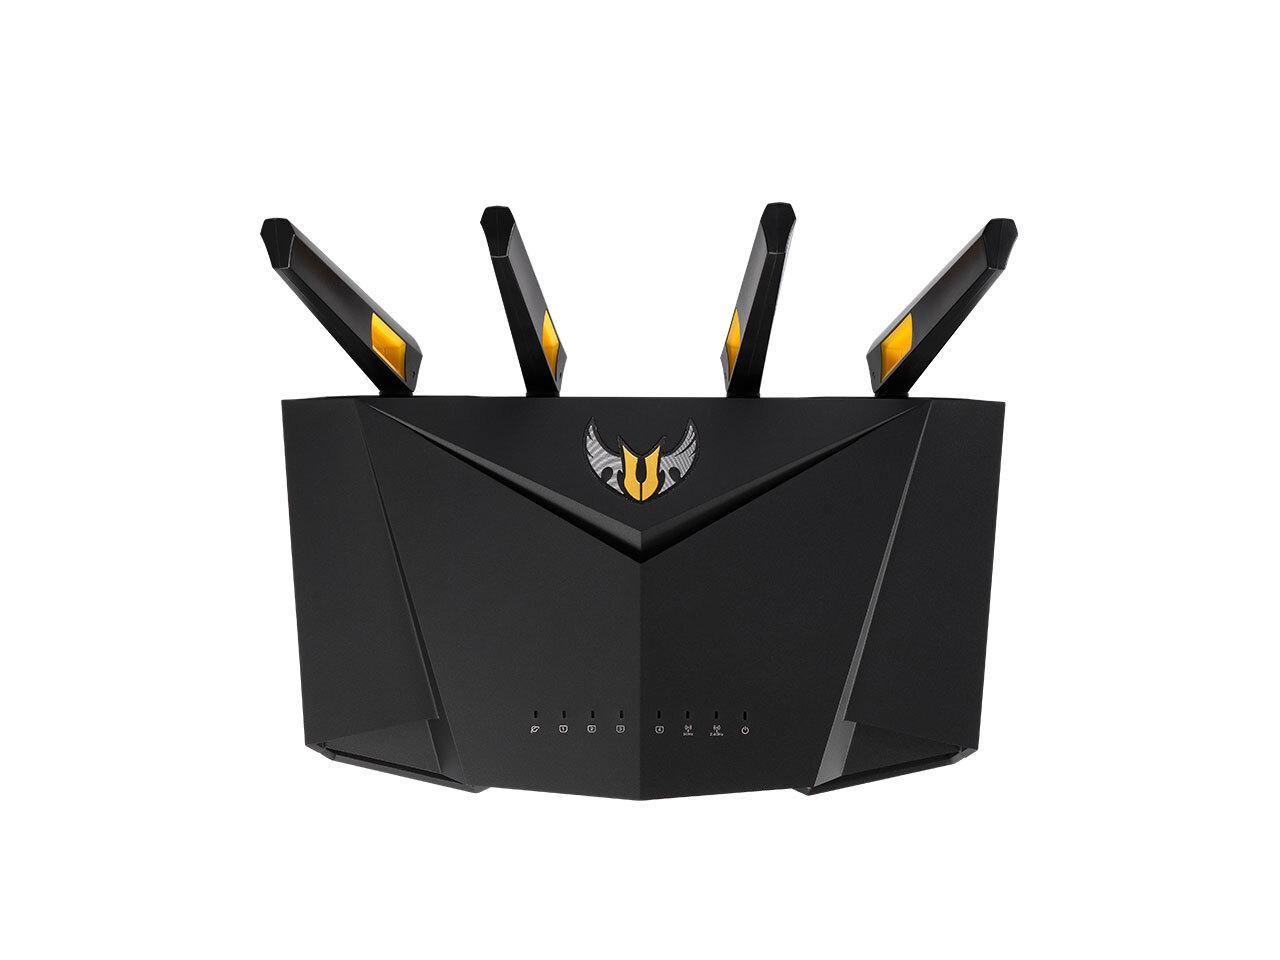 Caution sharply Monarchy ASUS AX3000 dual-band wifi6 router 802.11ax (2402Mbps+574Mbps) router  supports MU-MIMO and OFDMA technology, ax wifi 6 mesh gaming router Ideal  for Online Gaming/4K UHD Streaming - Newegg.com